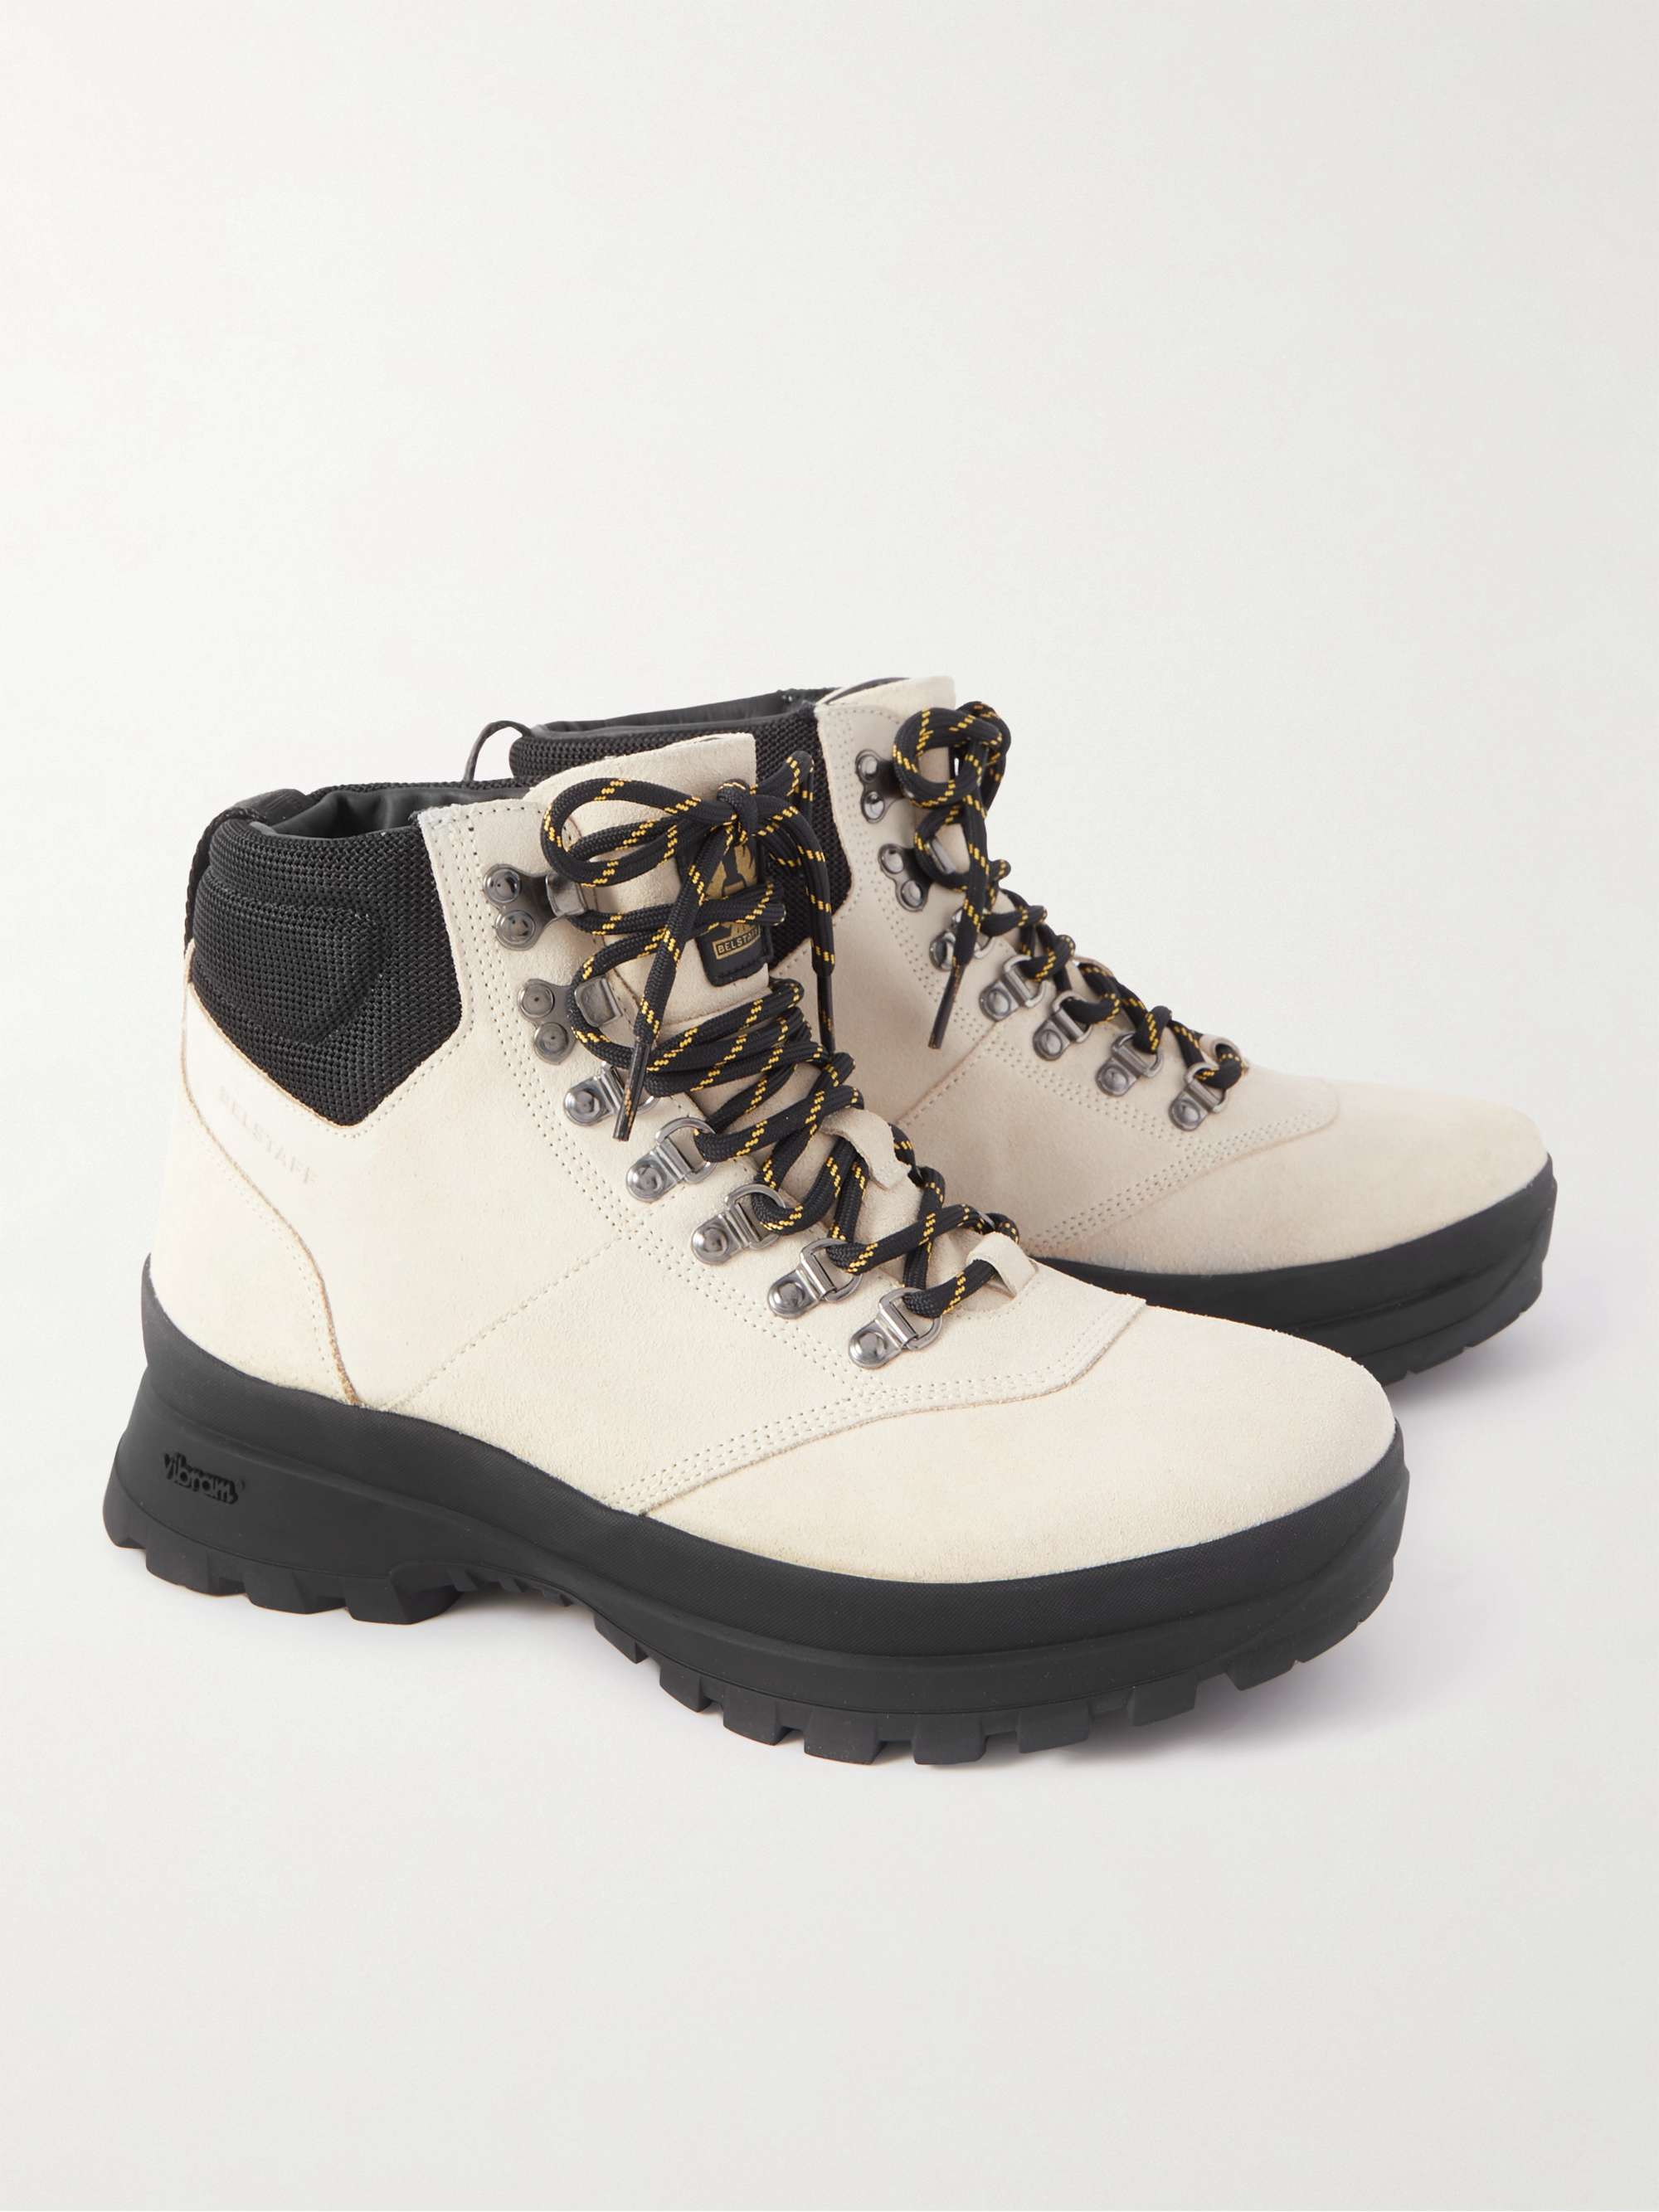 BELSTAFF Scramble Mesh-Trimmed Leather Lace-Up Boots